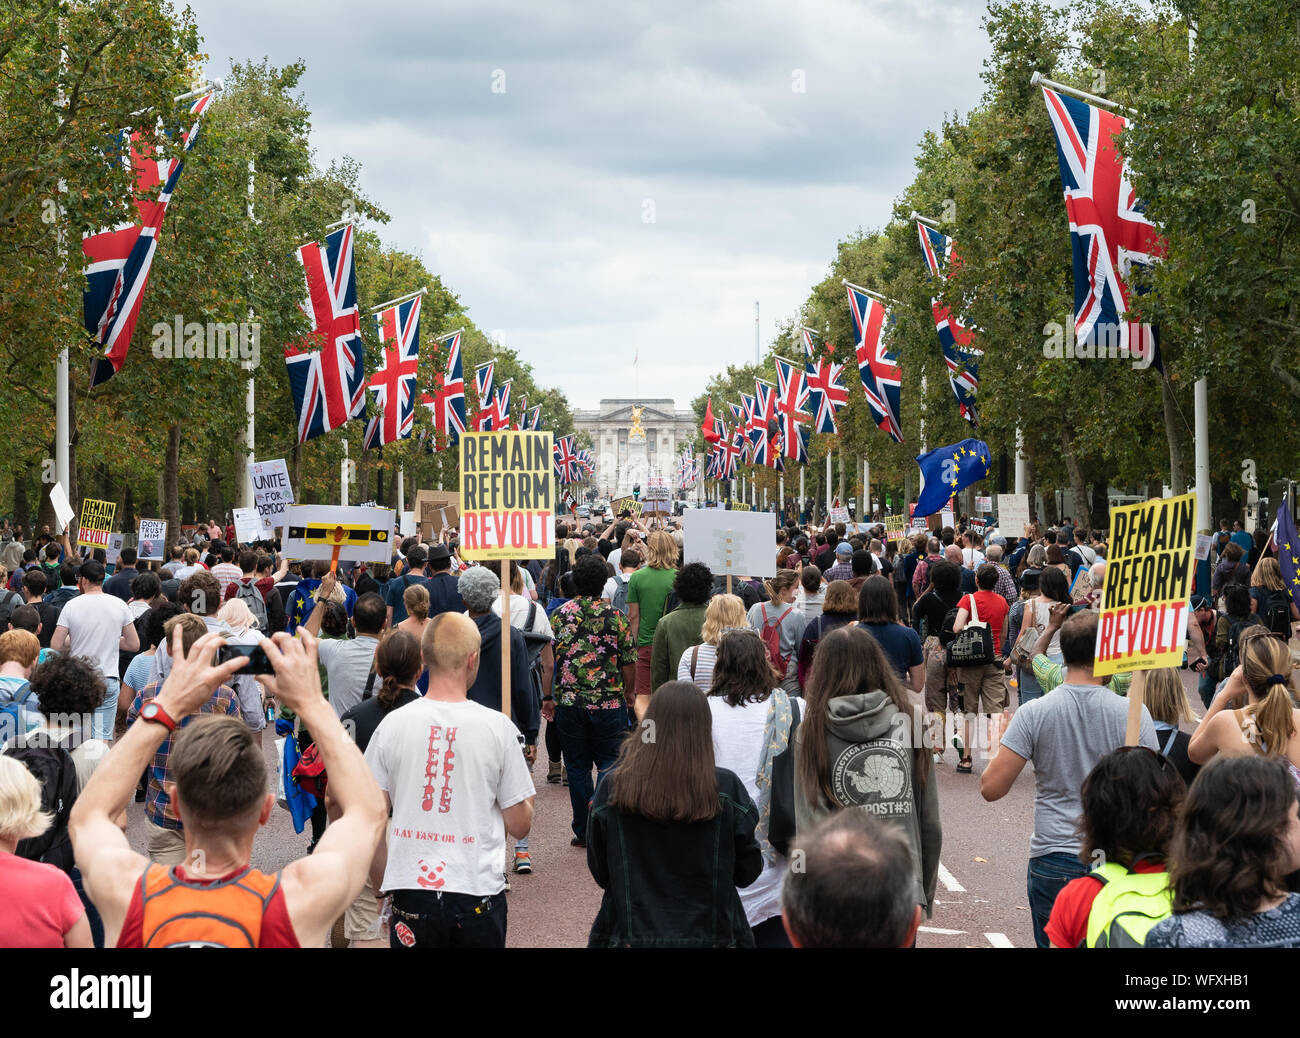 31th Aug 2019 - London, UK. An Anti-Brexit protesters with placards and banners marching towards Buckingham Palace. Stock Photo